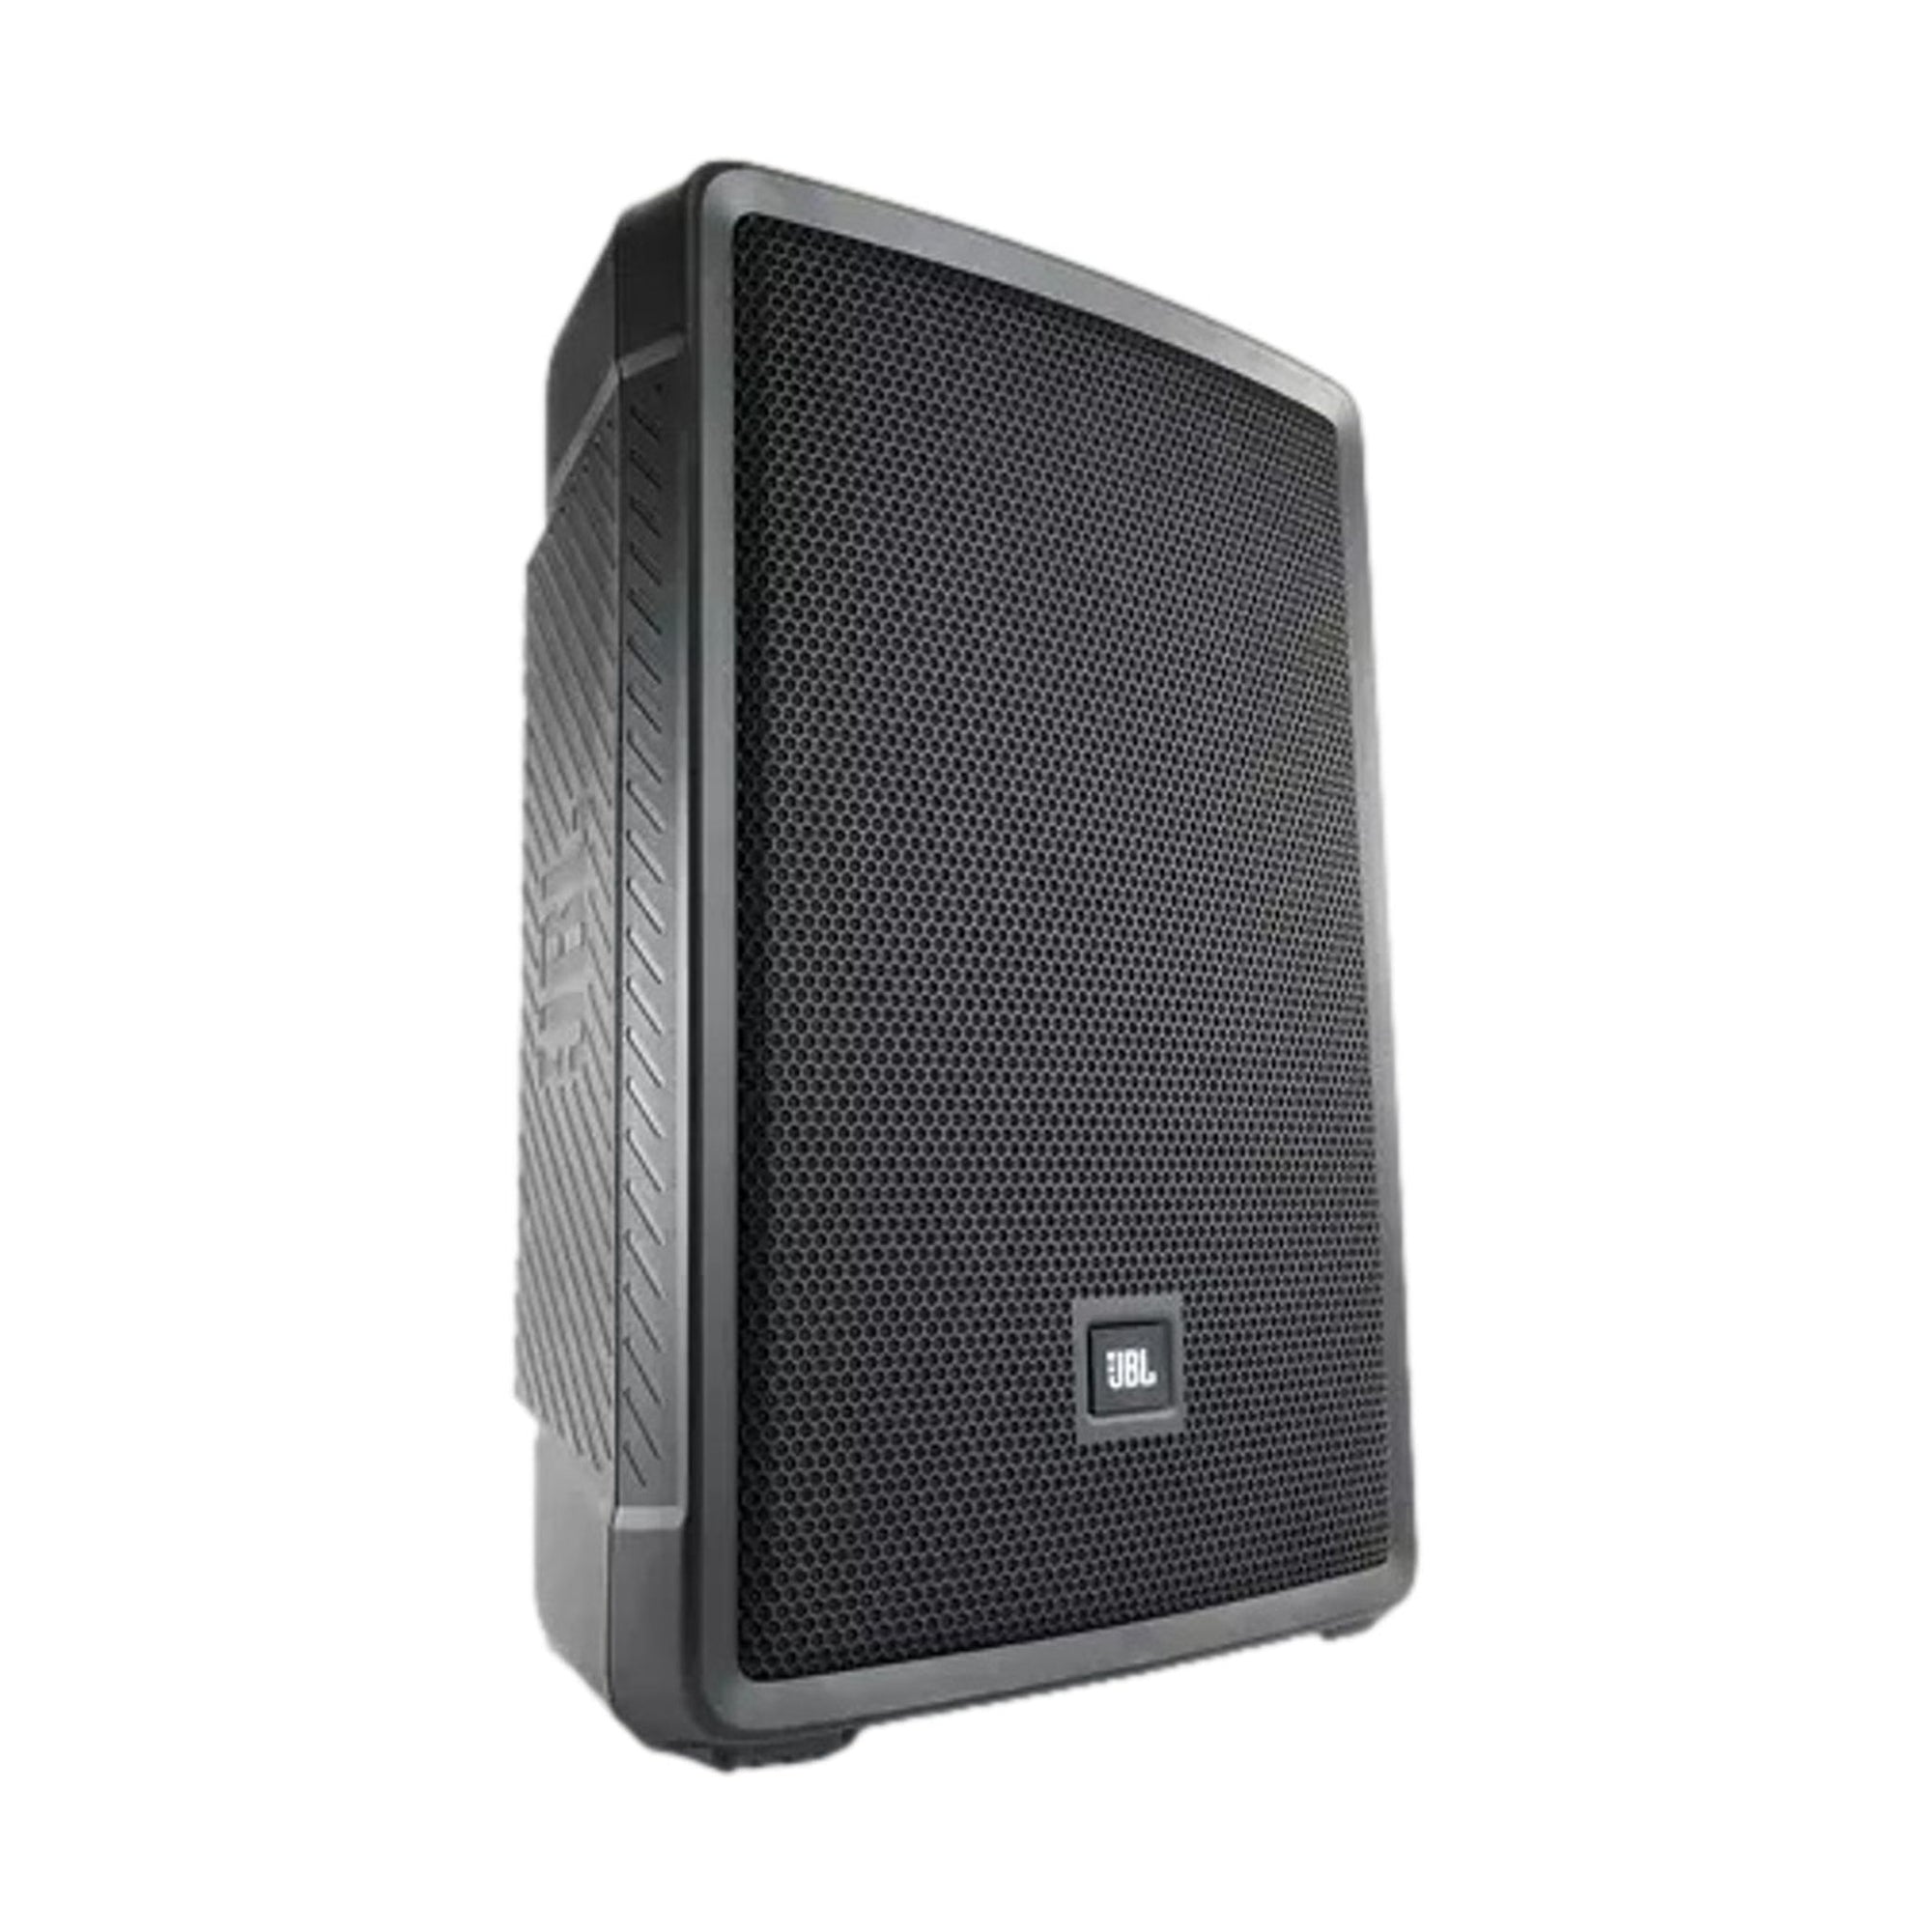 The JBL IRX112BT portable powered PA loudspeaker delivers class-leading volume and clarity, total ease of use and an unrivaled feature set at our most affordable price point.